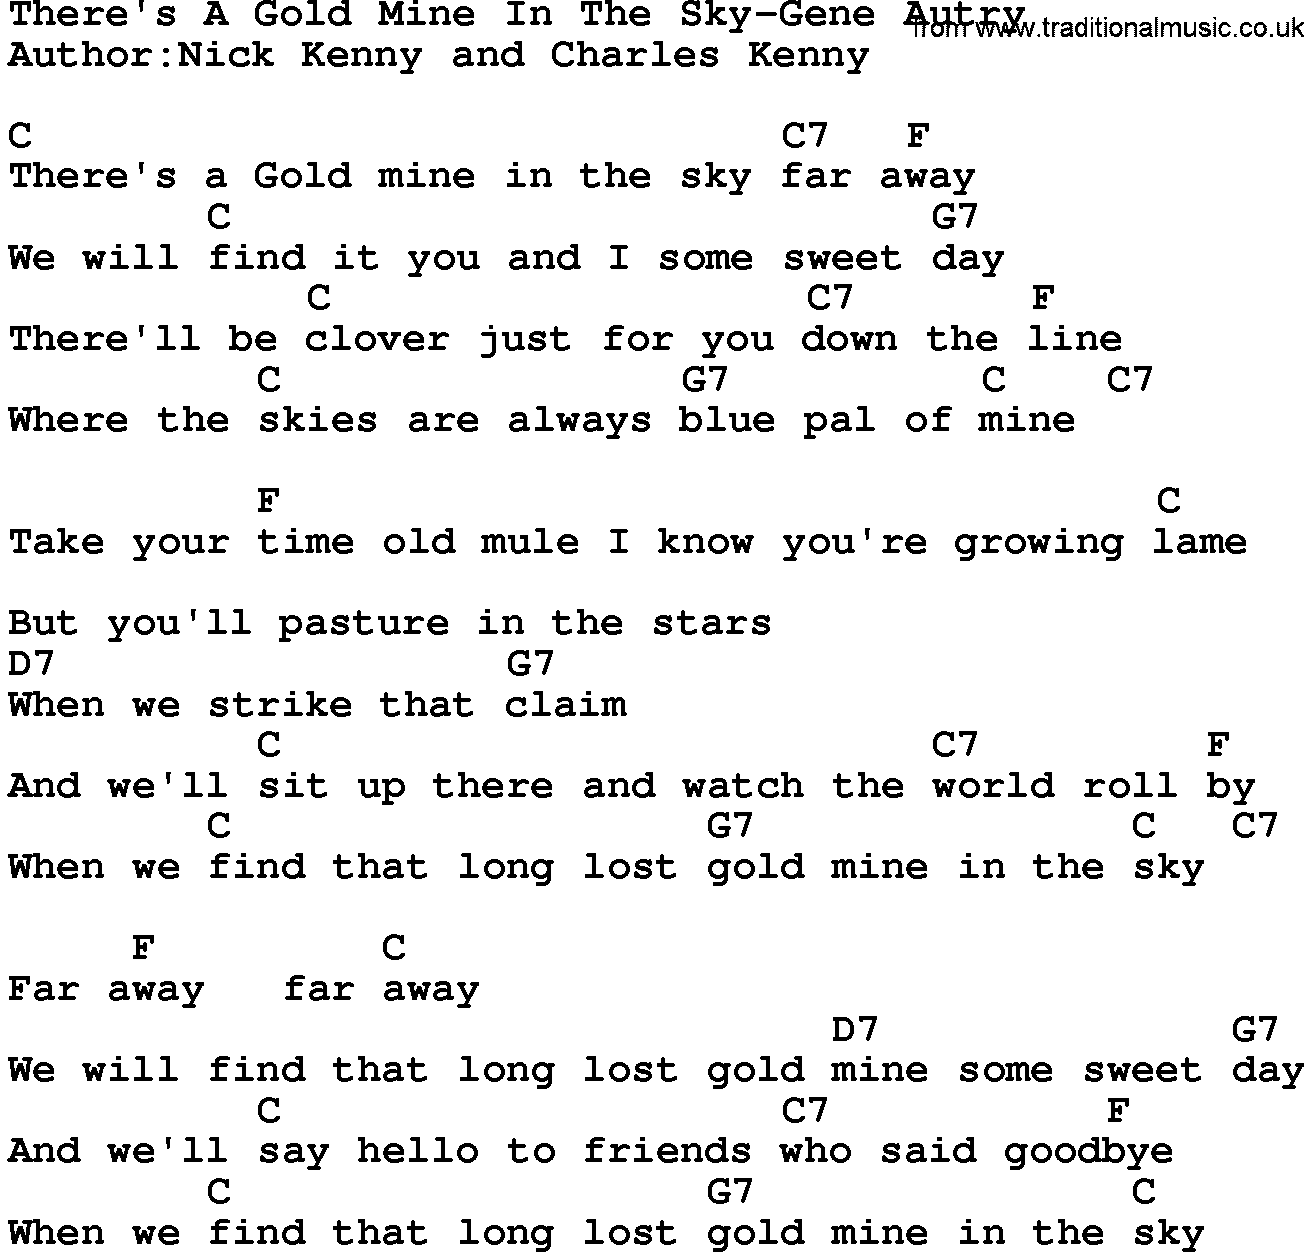 Country music song: There's A Gold Mine In The Sky-Gene Autry lyrics and chords